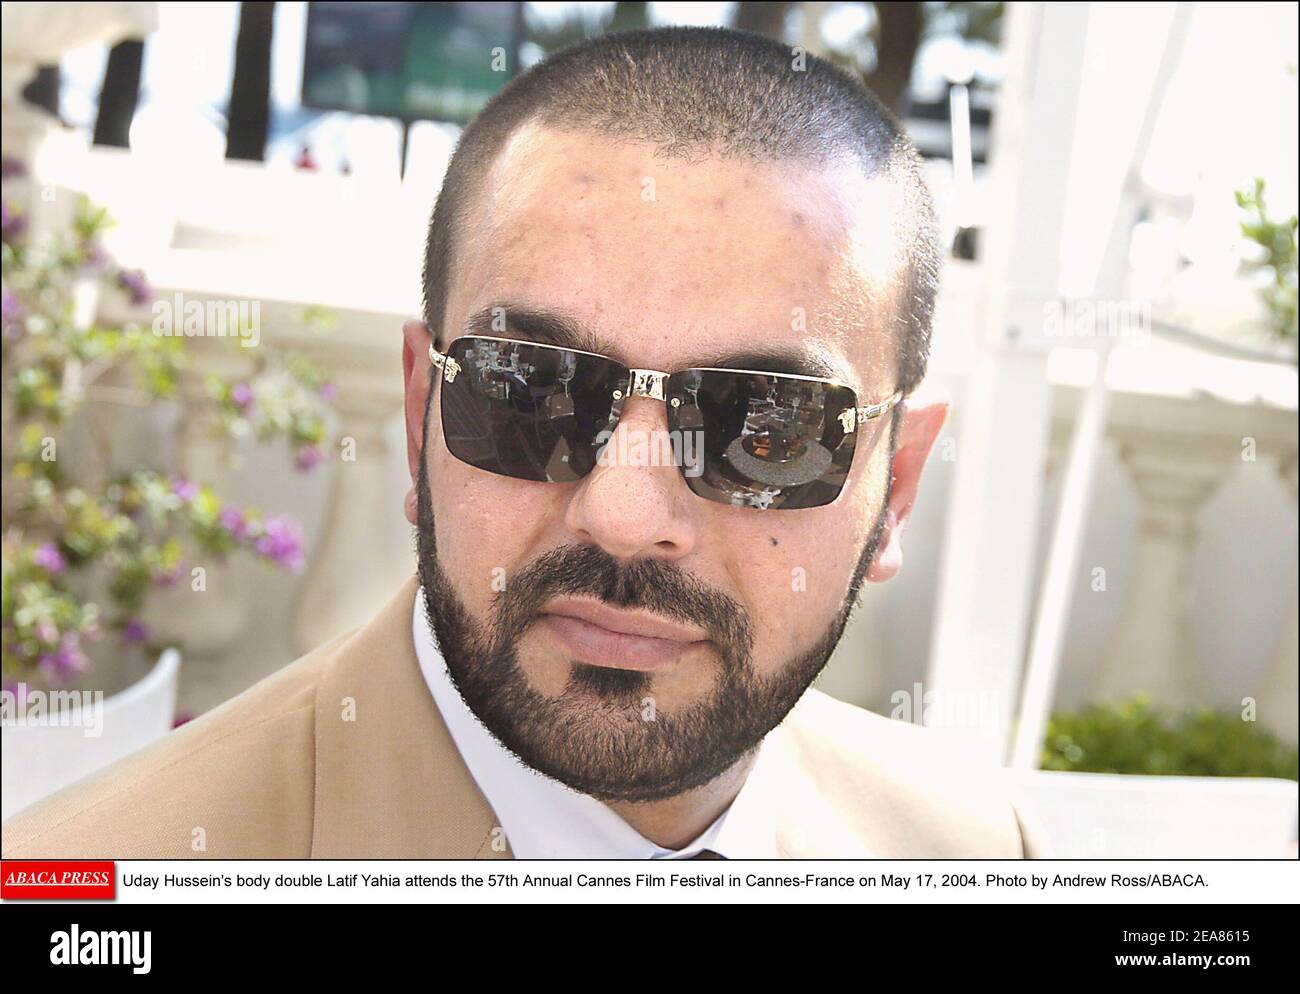 Uday Hussein's body double Latif Yahia attends the 57th Annual Cannes Film Festival in Cannes-France on May 17, 2004. Photo by Andrew Ross/ABACA. Stock Photo